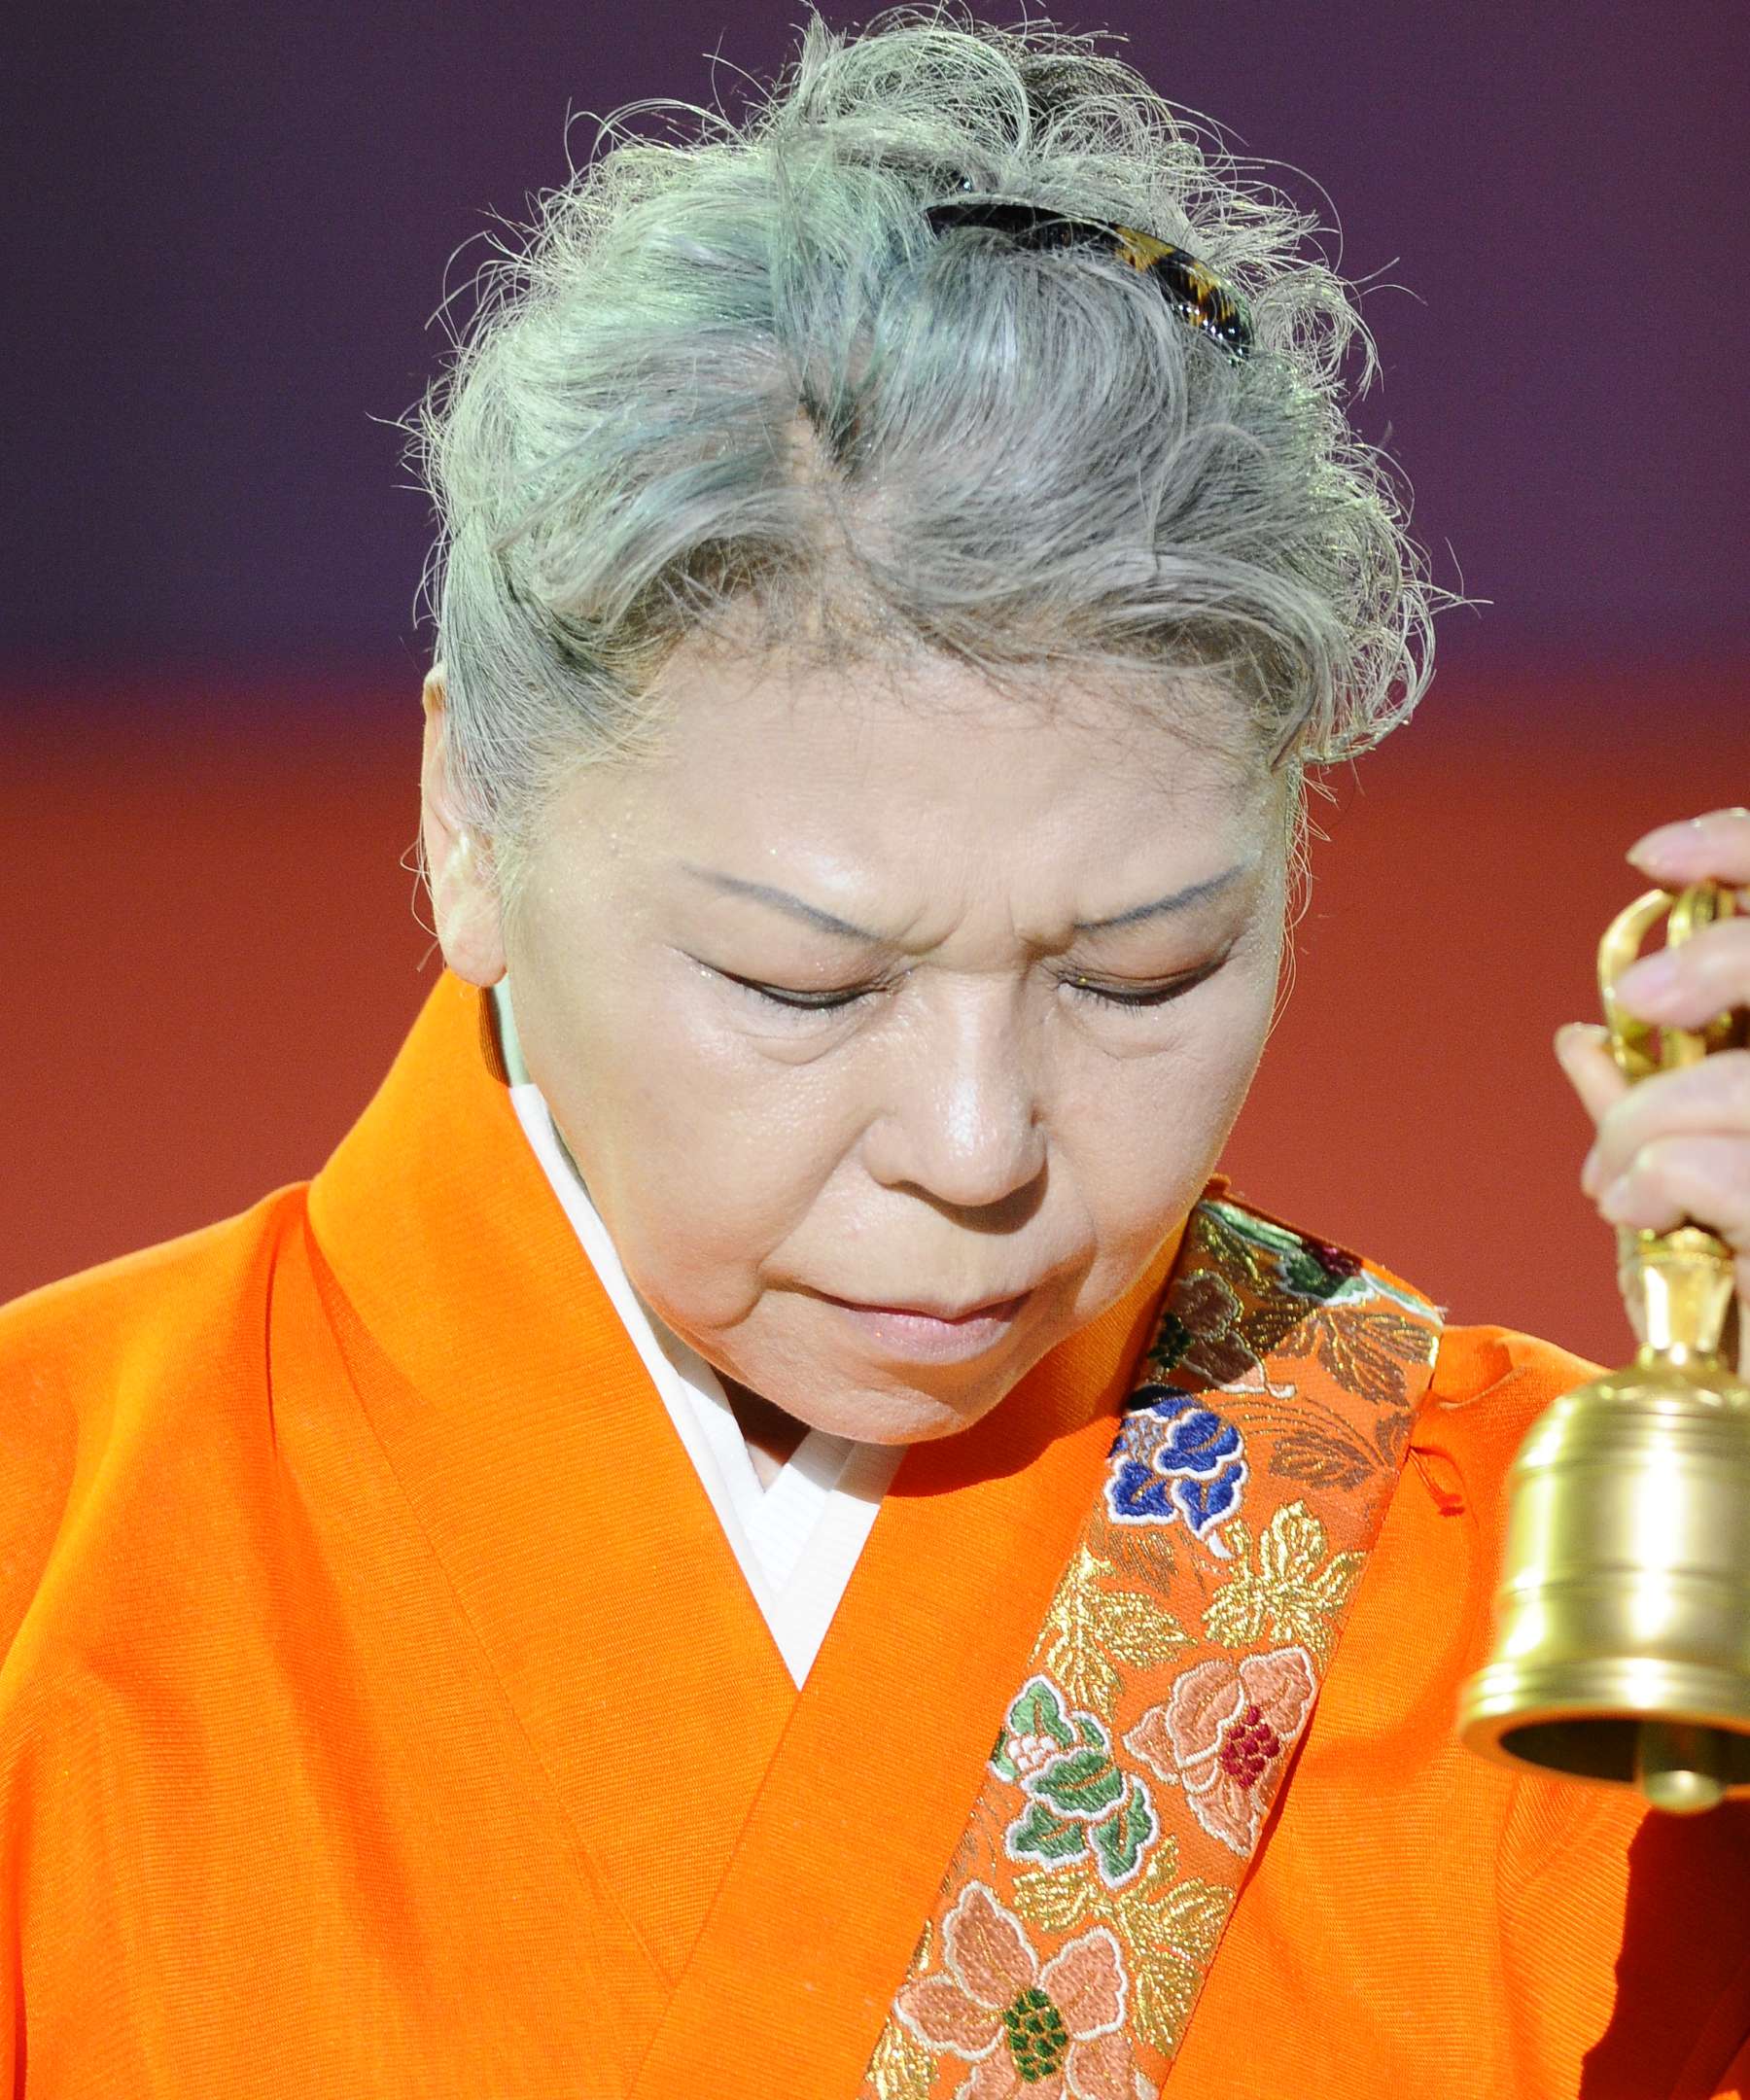 A photo of Her Holiness, gray-haired, wearing a bright orange robe with floral hem, eyes closed in deep concentration, holding a golden hand bell while performing a ritual.